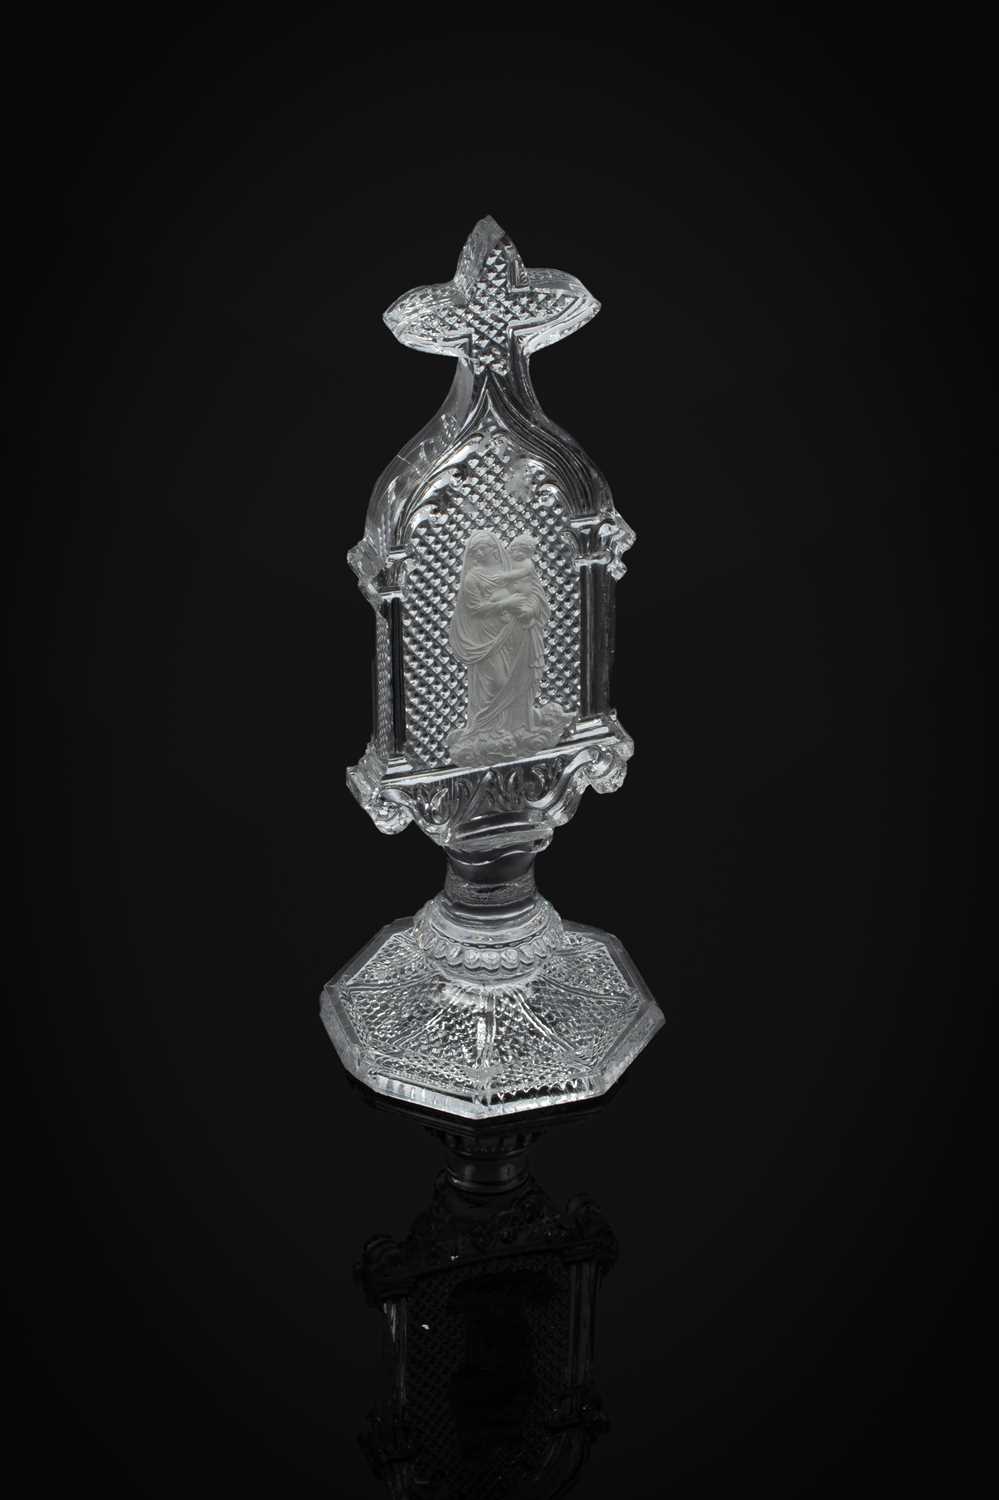 A glass sulphide etched religious ornament